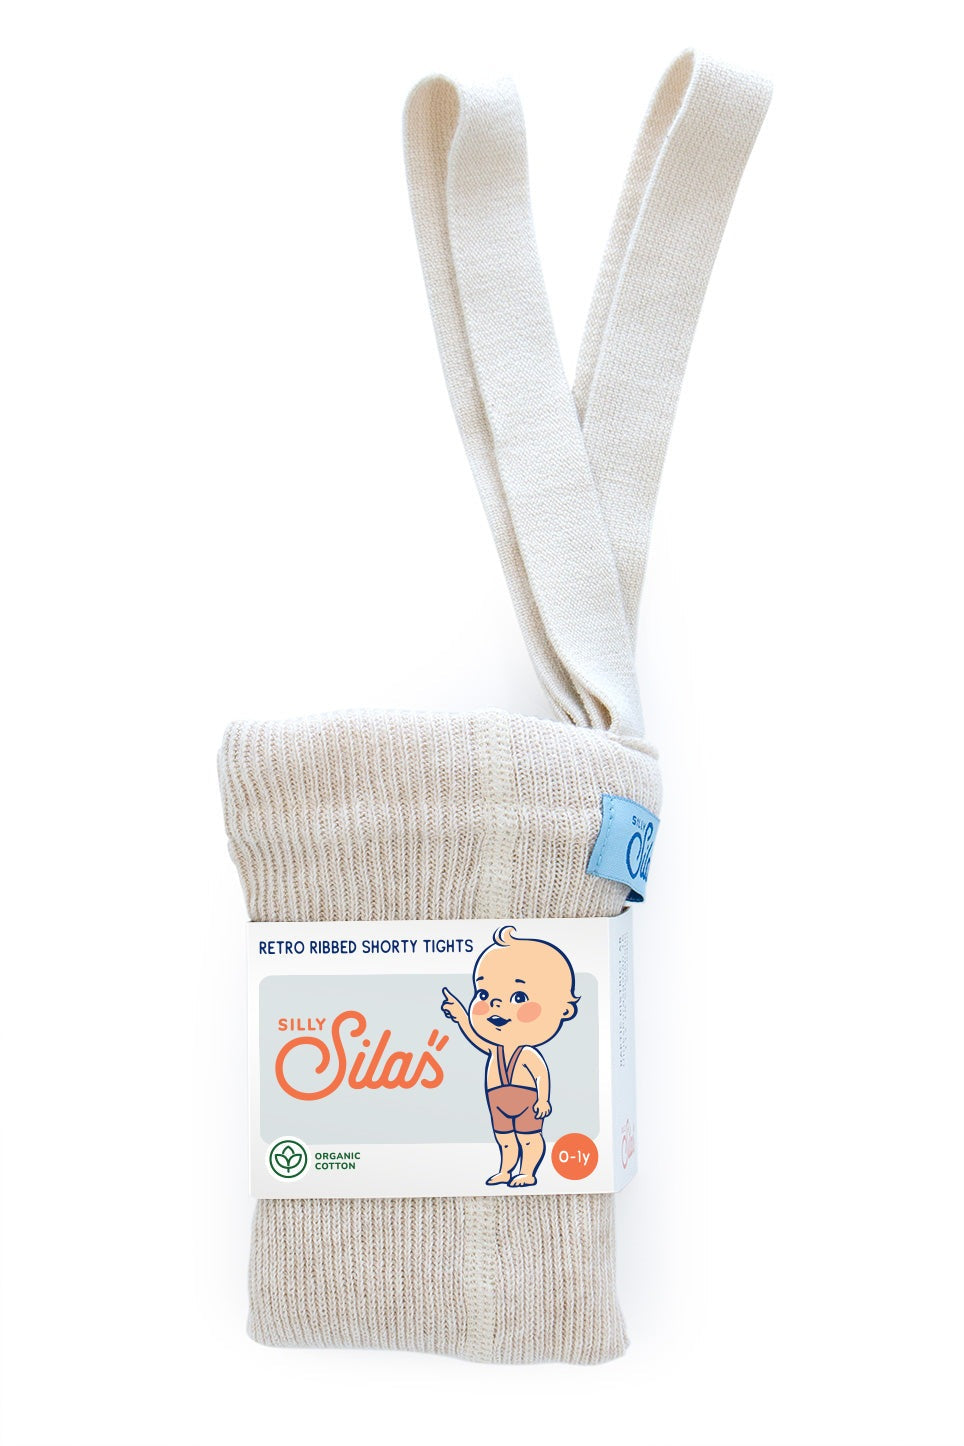 Silly Silas, Shorty tights cream blend, children’s tights, baby tights, tights with braces, tights for the summer, sustainable children’s brands, Nottinghamshire independent children’s store, Silly Silas Stockist, modern kids shop